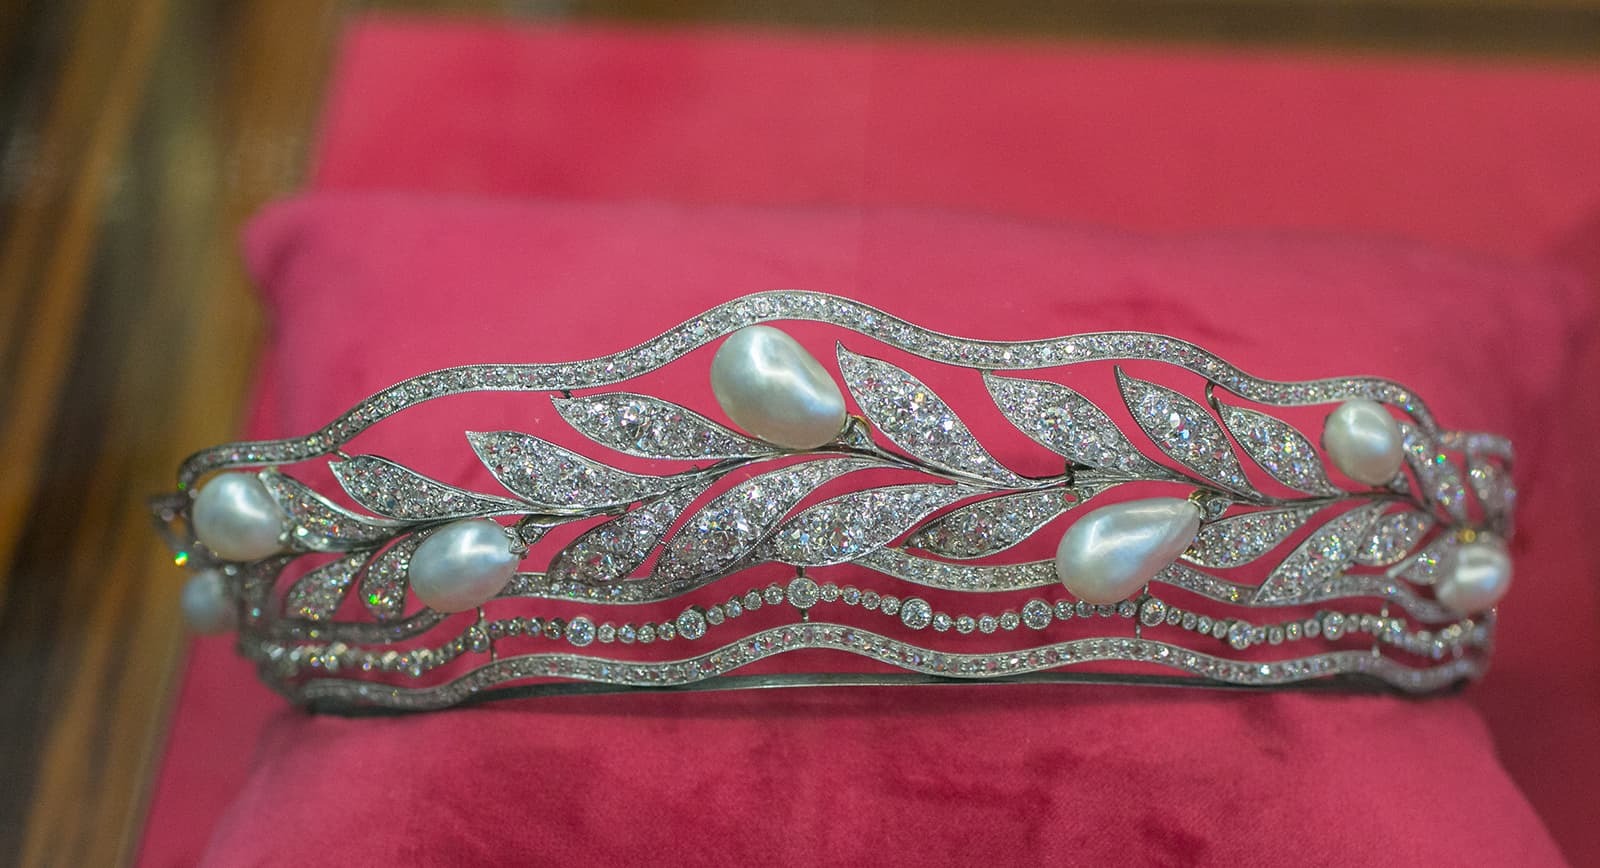 Tiara with natural pearls and diamonds created in 1900-1901 and presented at Christie's Magnificent Pearls exhibition in bahrain